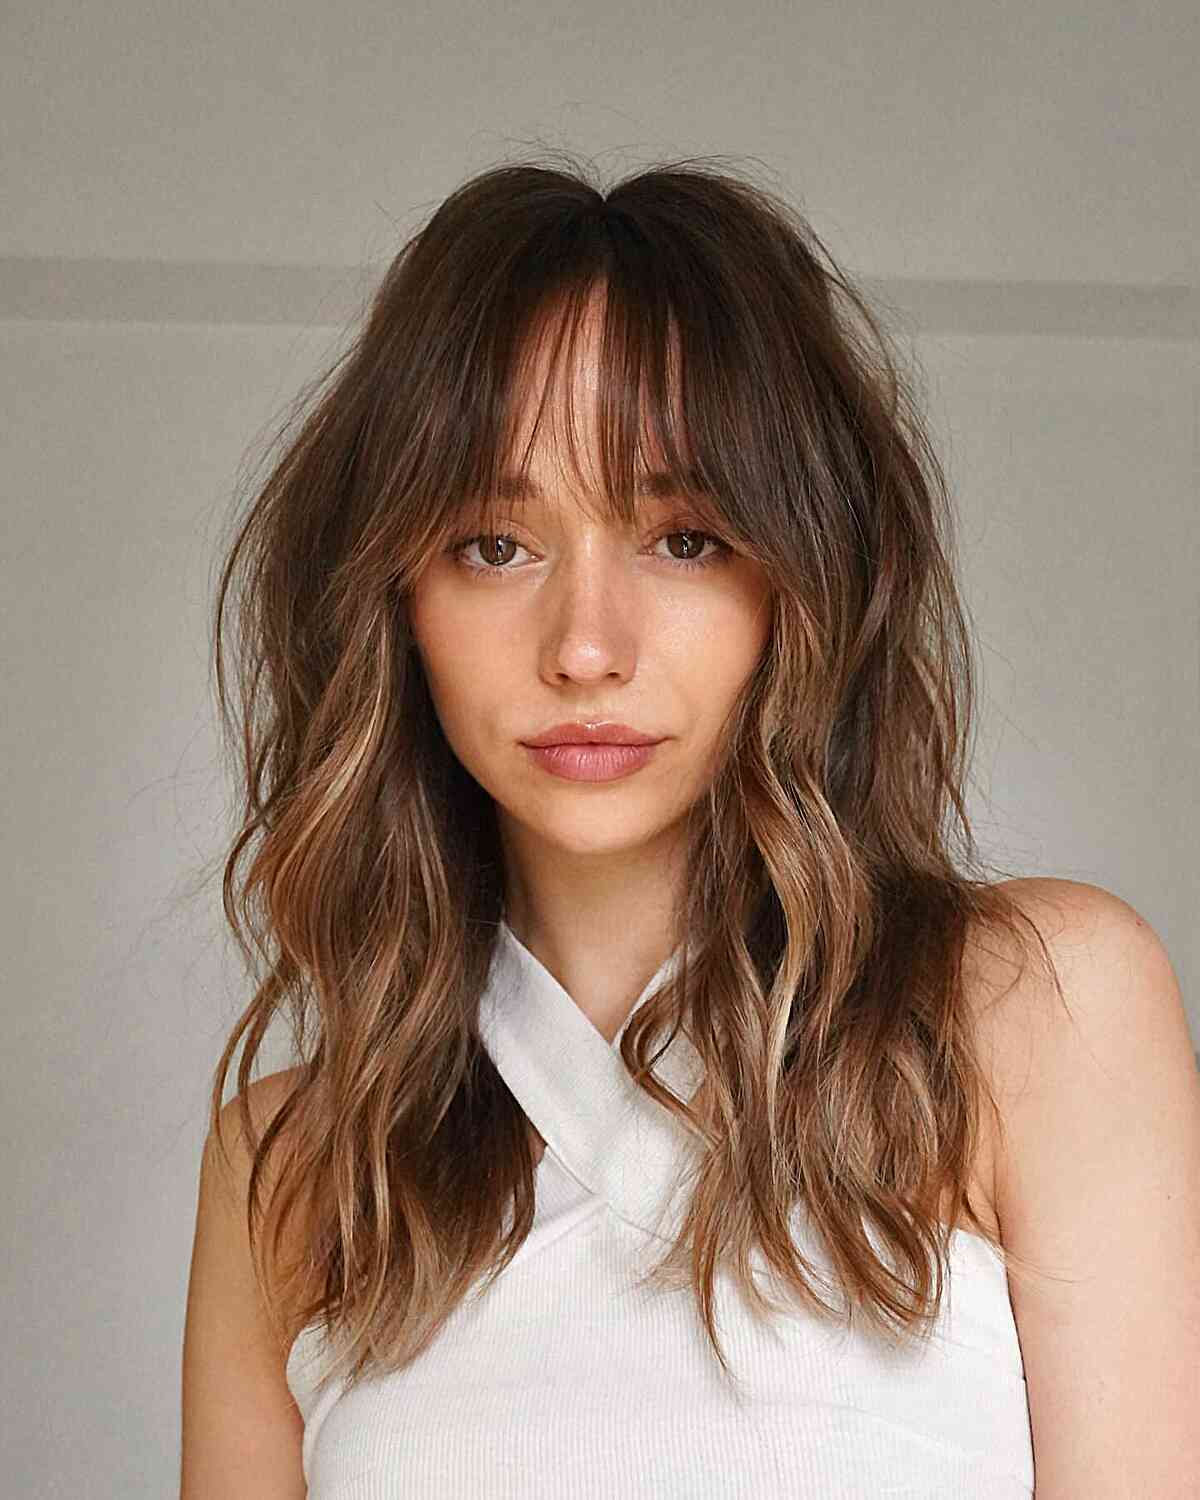 Waterfall See-Through Bangs with Internal Layers